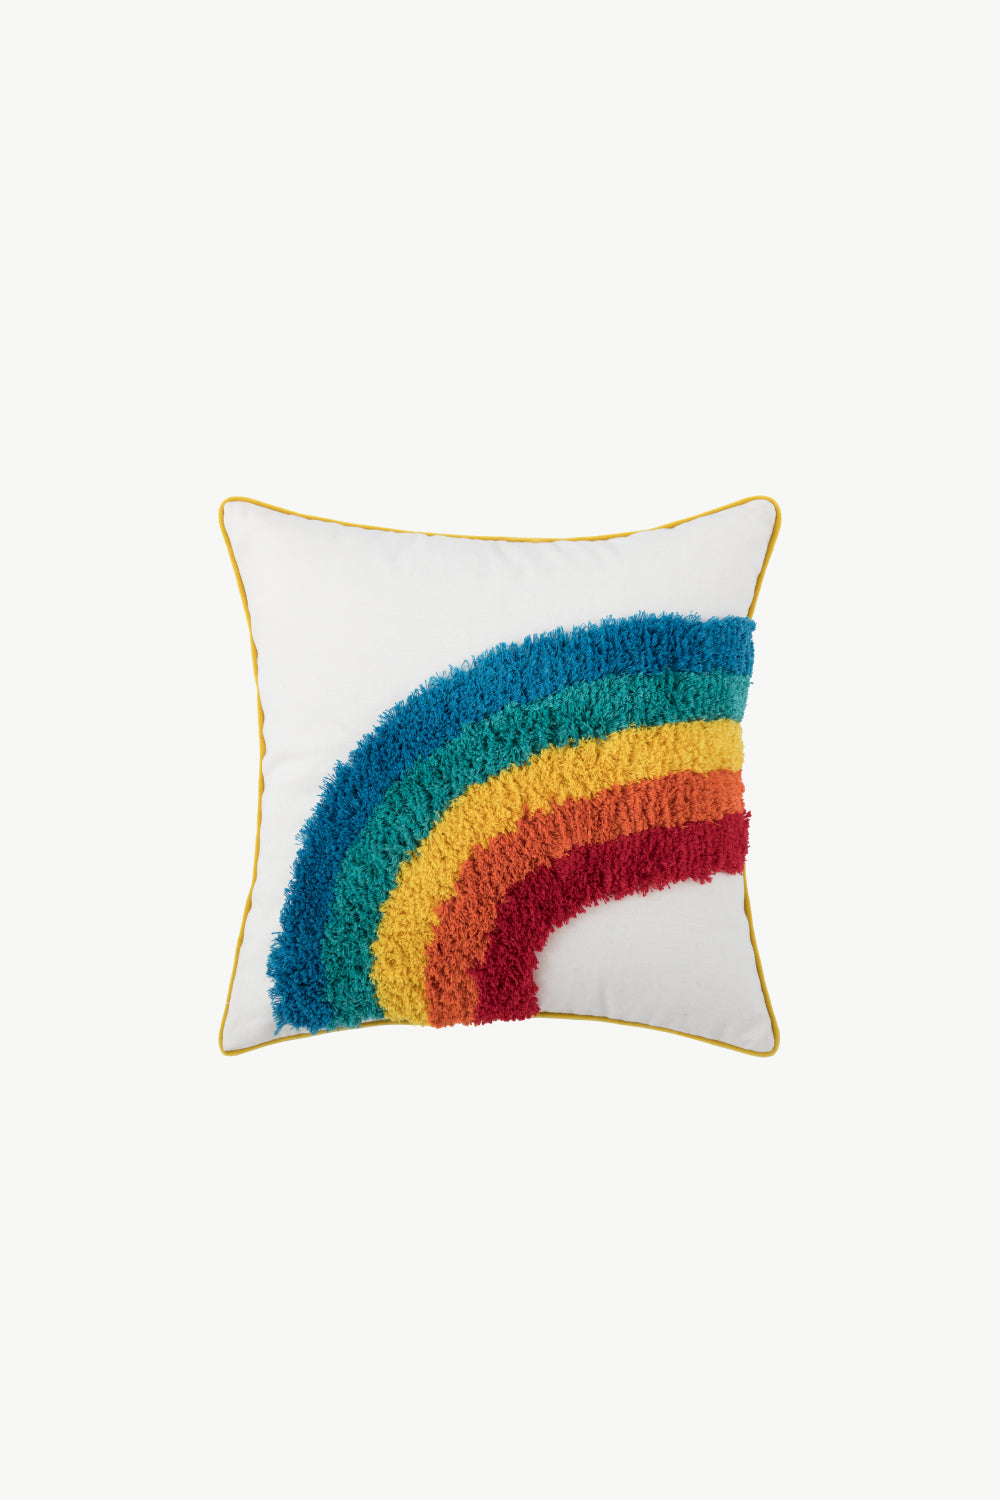 Buy 6 Styles Multicolored Pillow Cover by Faz